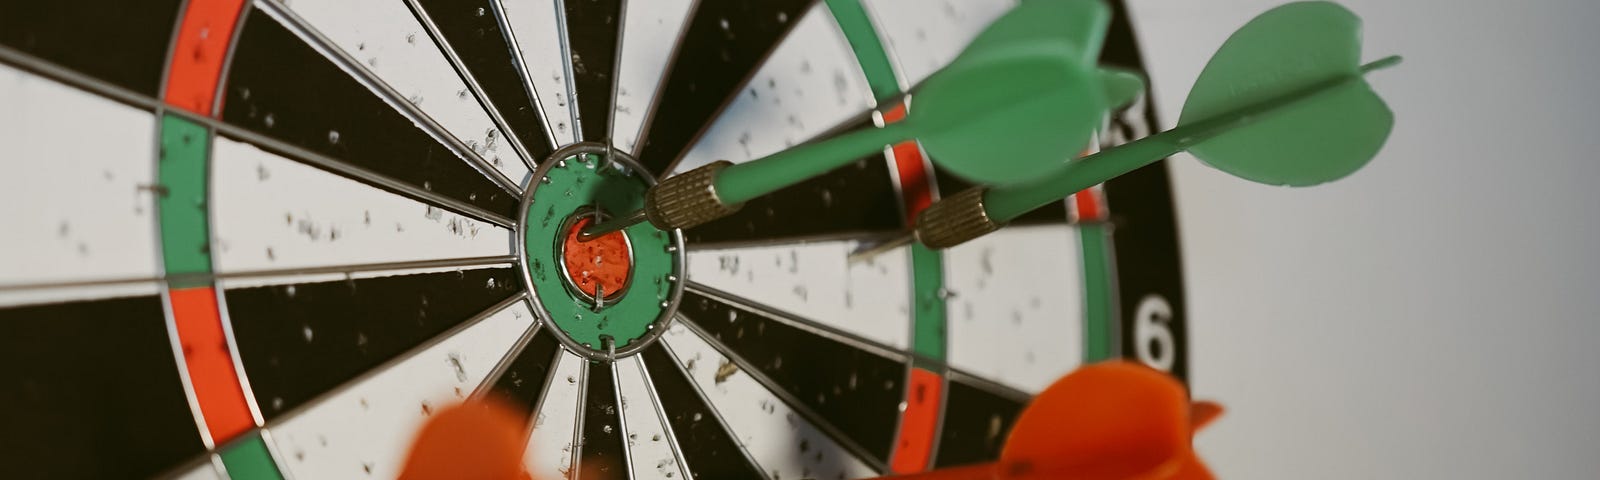 Green and red darts stuck in a red-white-black round dartboard